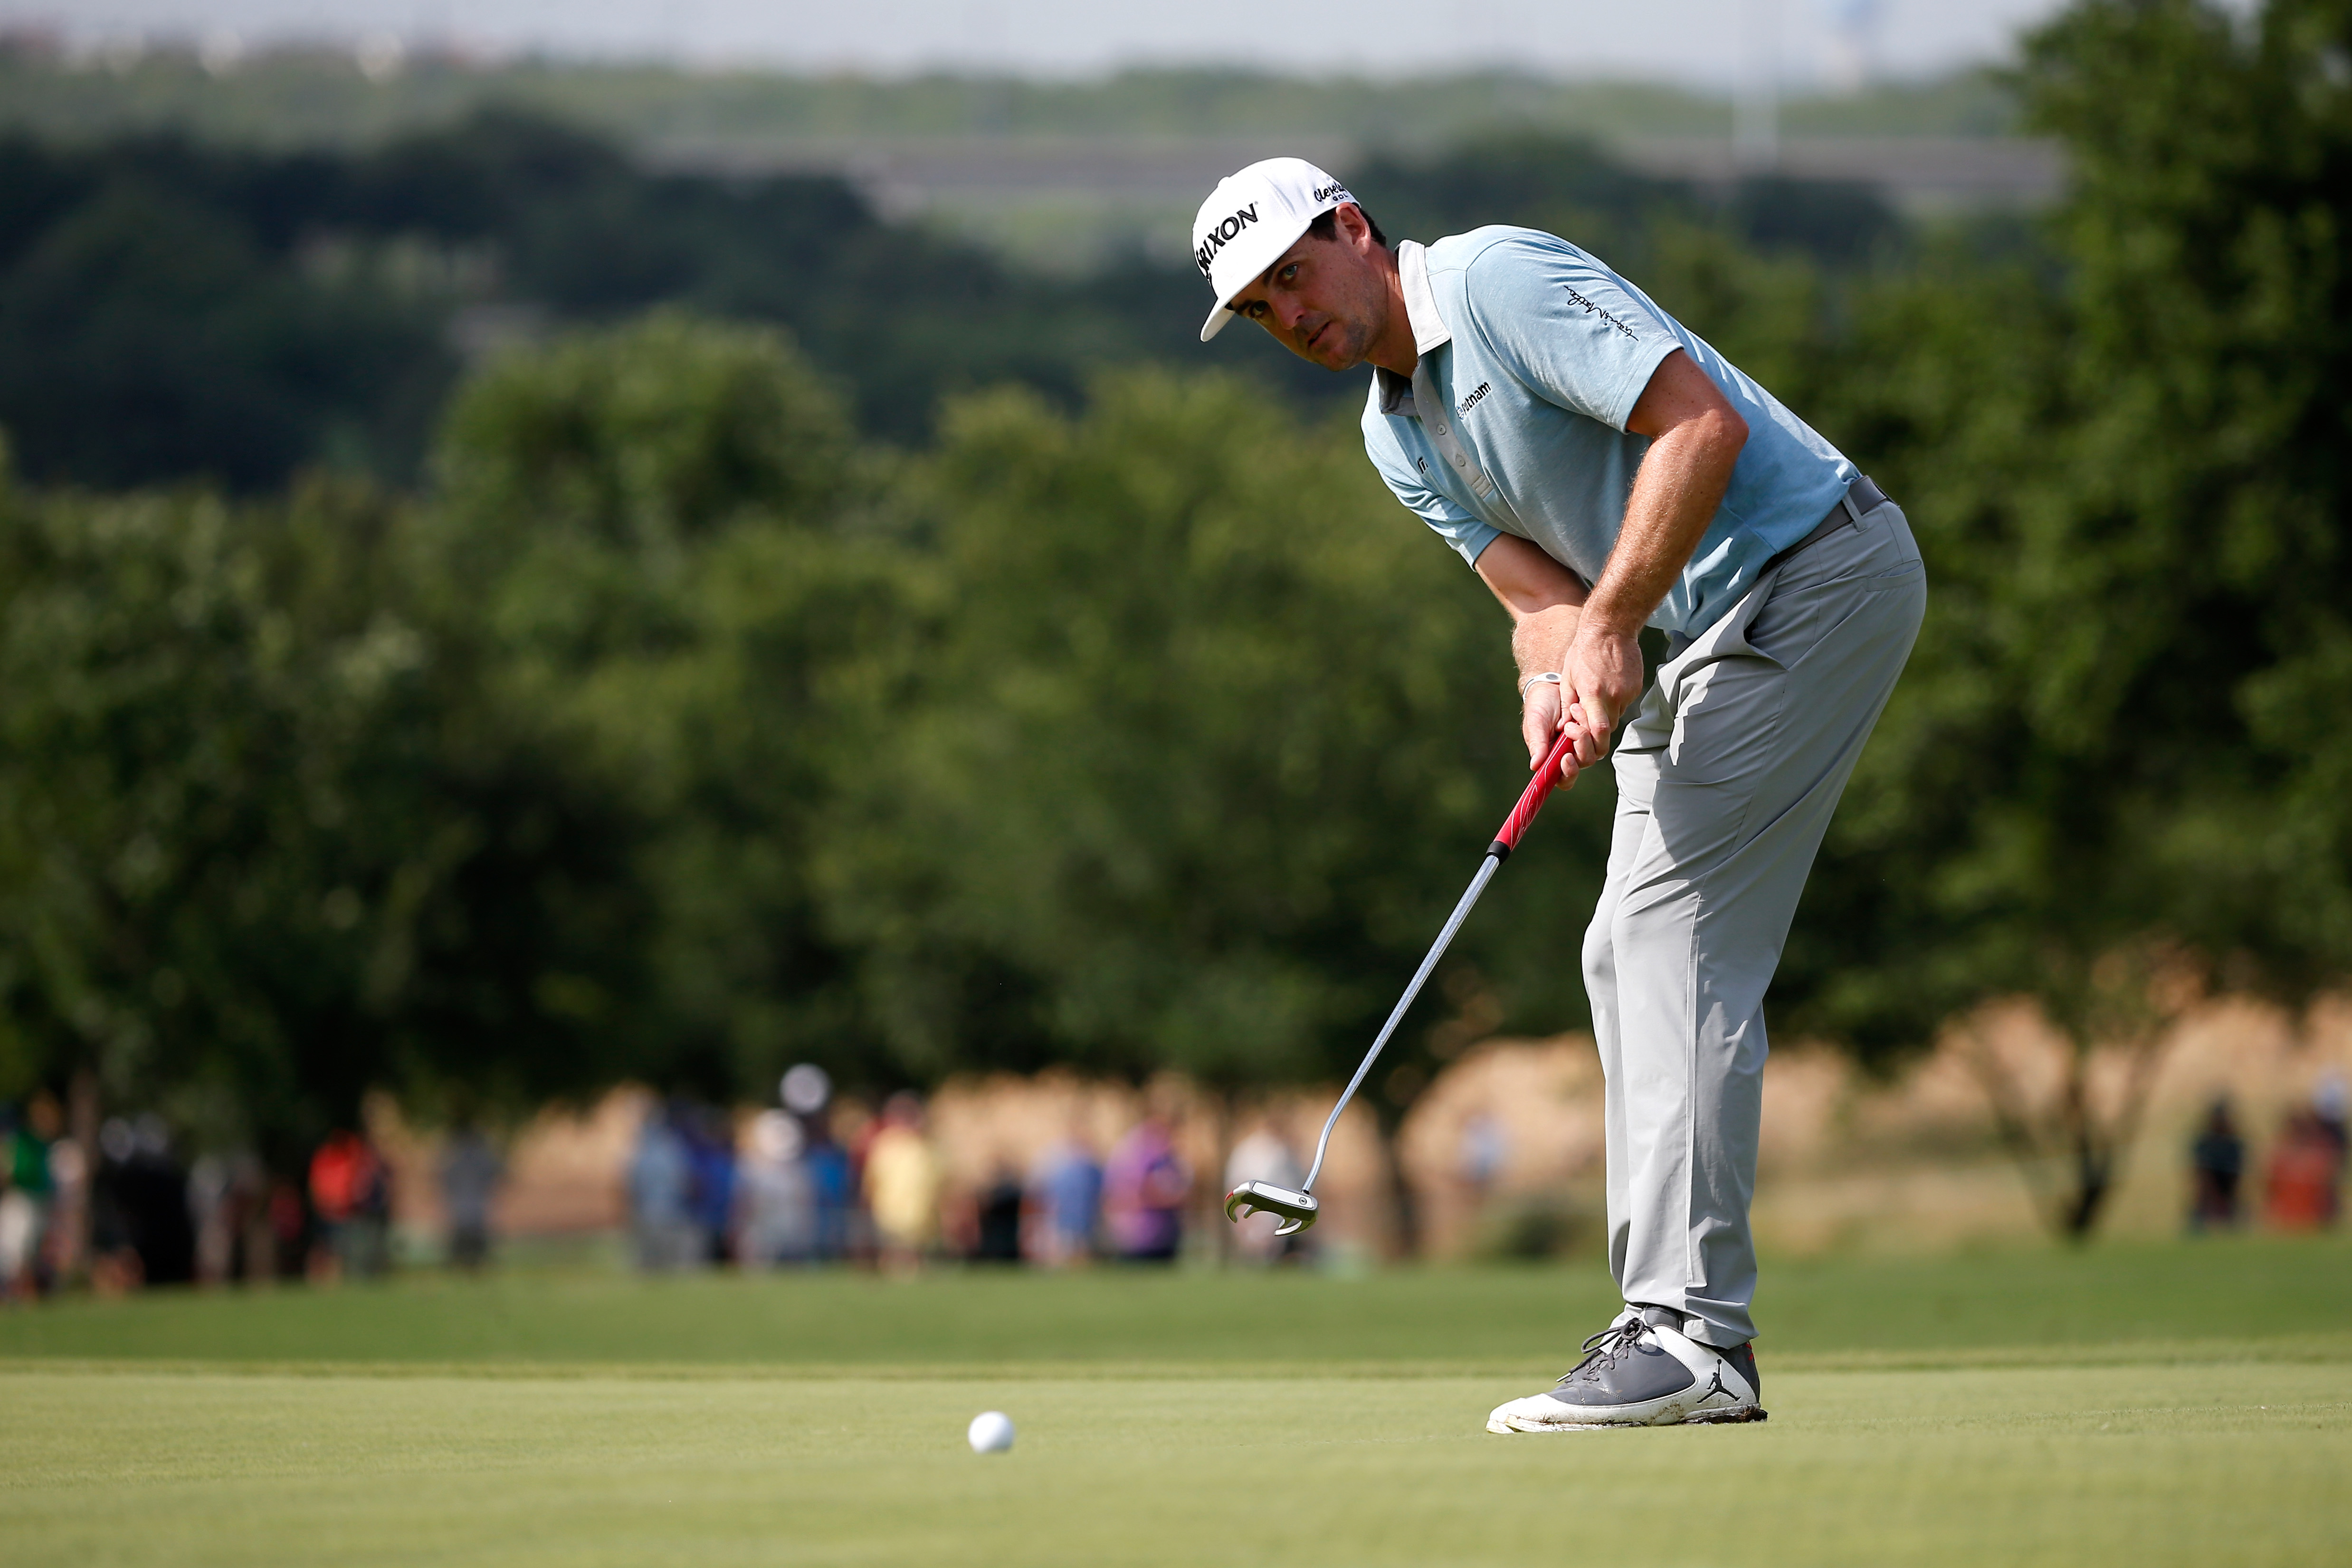 Pinch your triceps into your ribcage and arch your left wrist when putting, says Jonathan Yarwood (Photo: Getty Images)